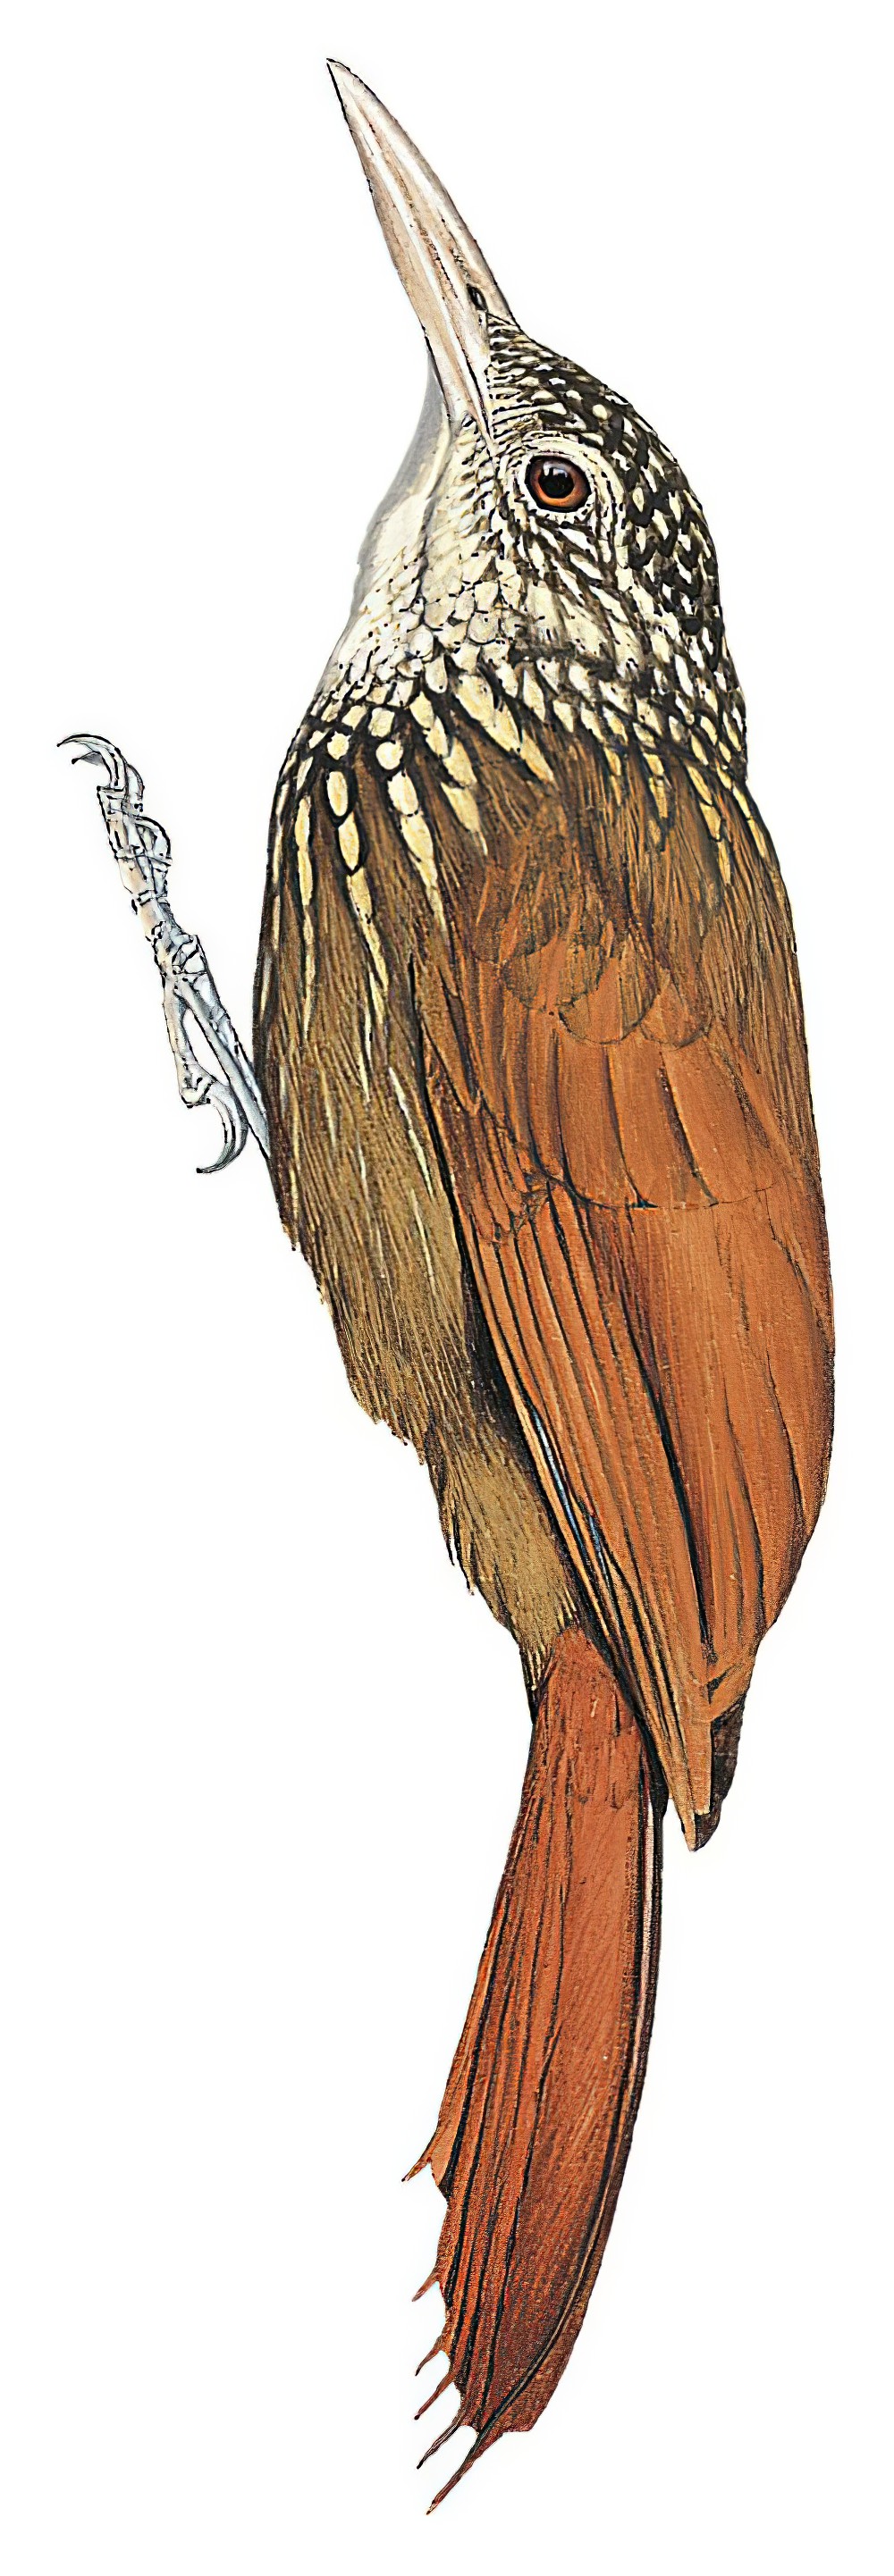 Straight-billed Woodcreeper / Dendroplex picus